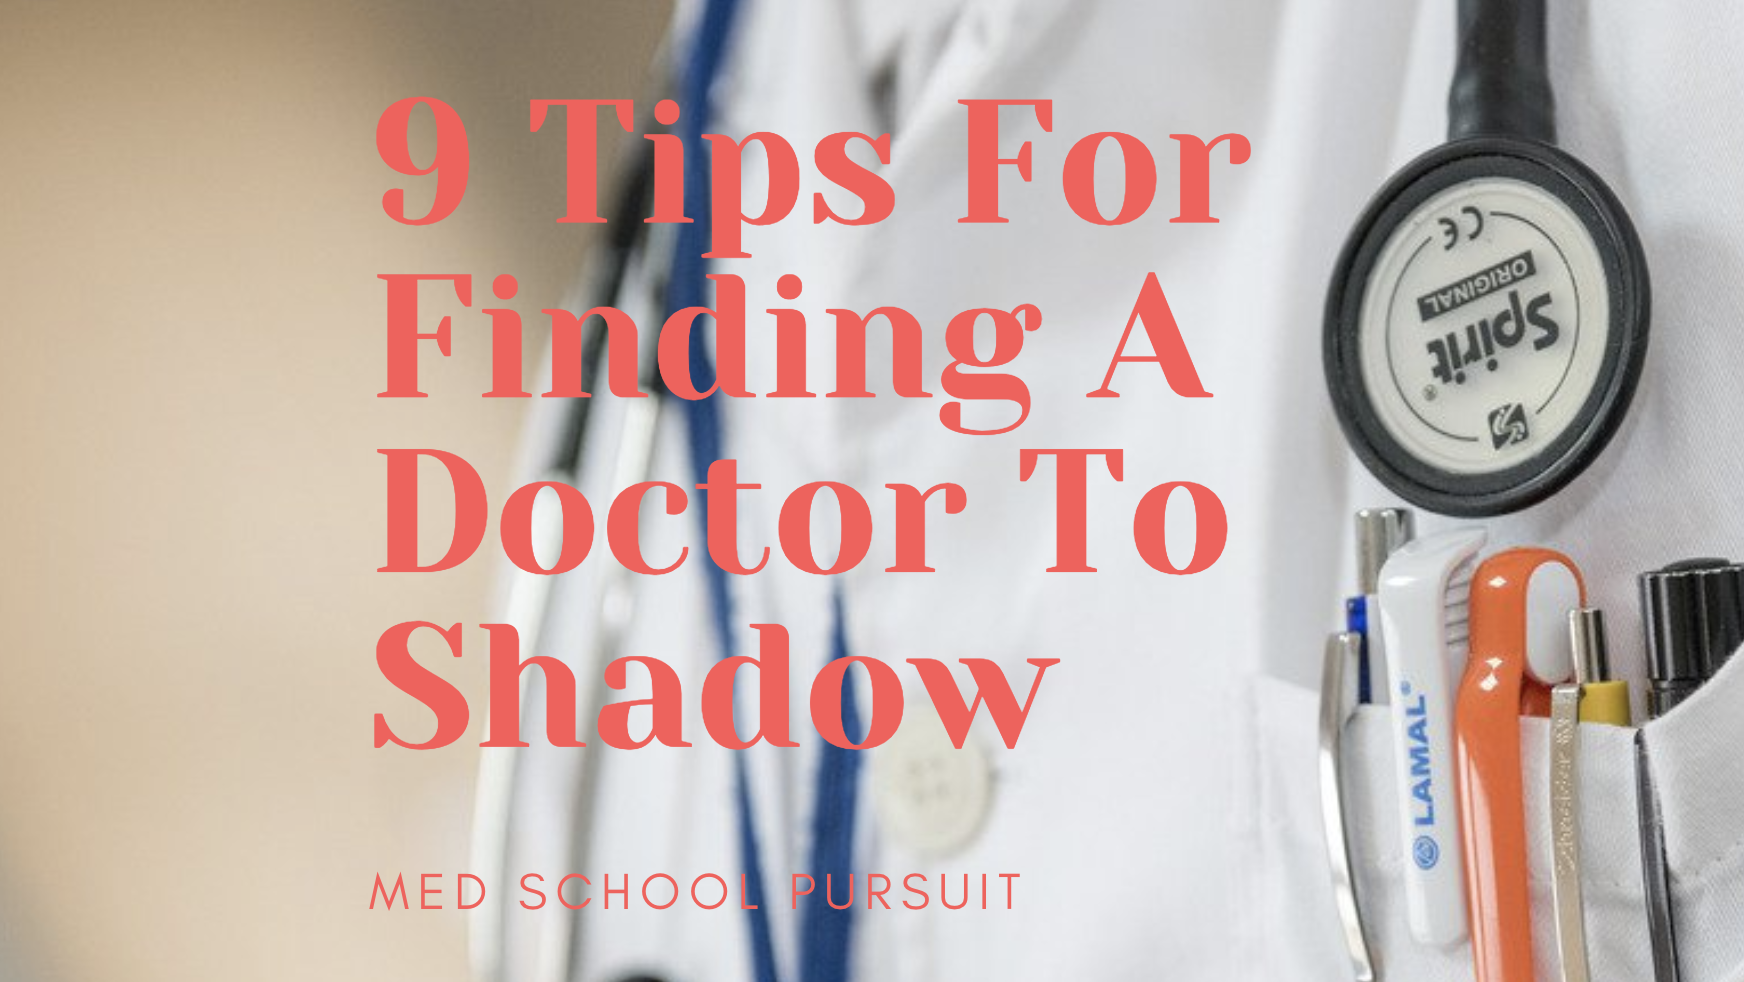 Finding a doctor to shadow